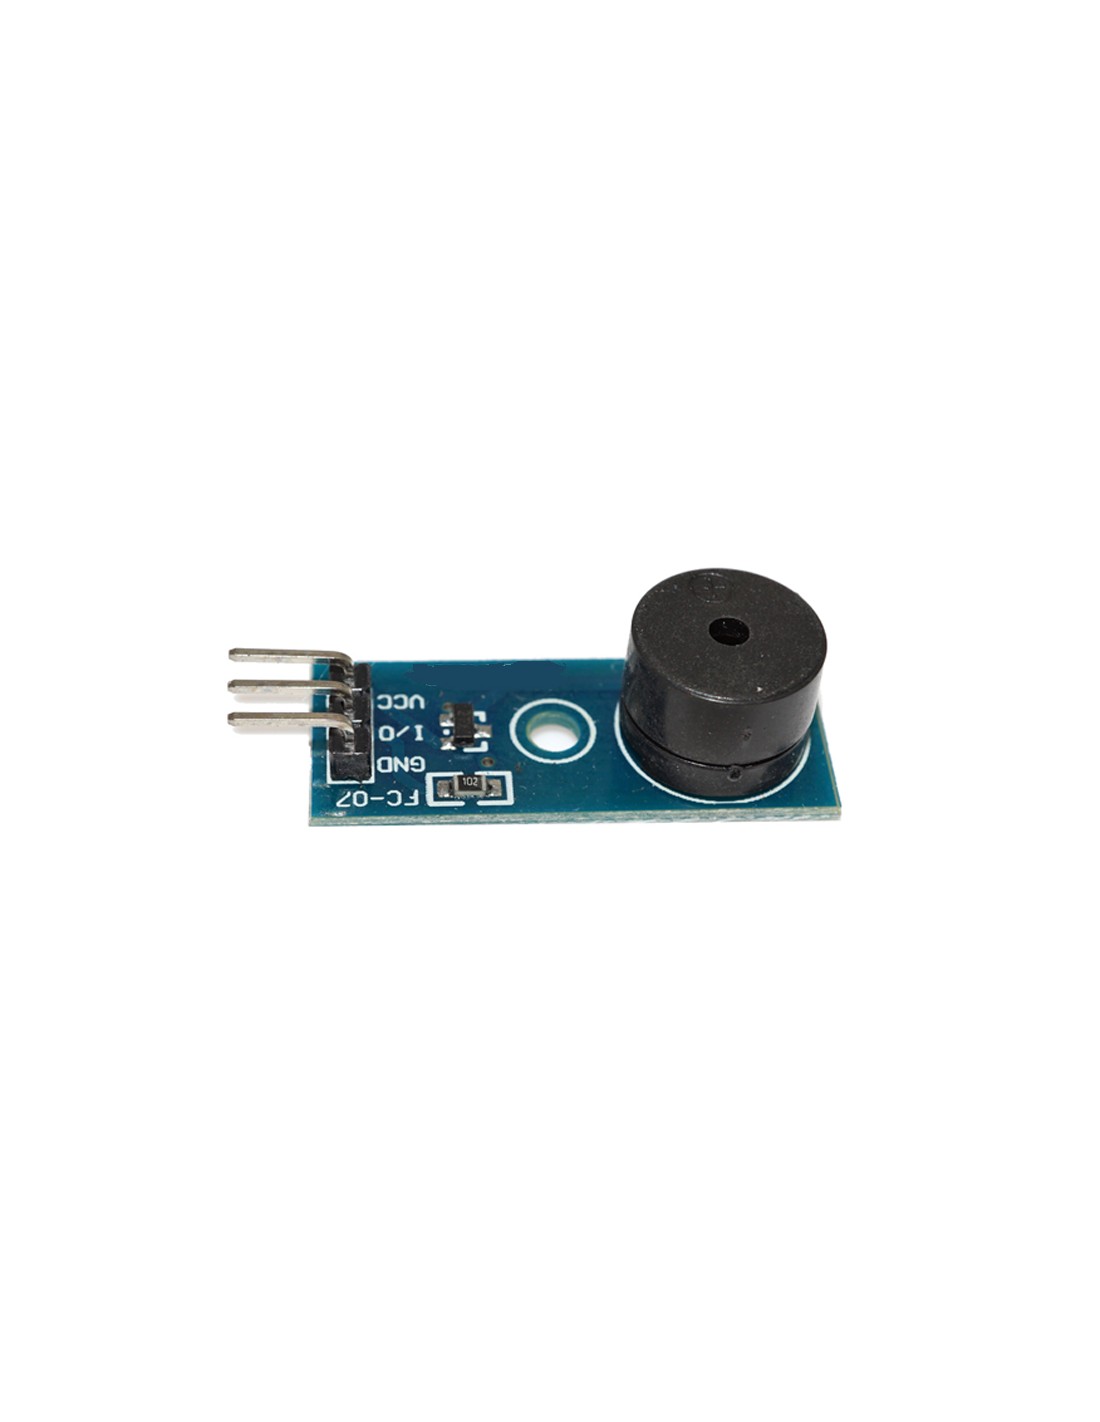 Ap Active Speaker Buzzer Module For Arduino Works With Official Arduino Boards Electrical